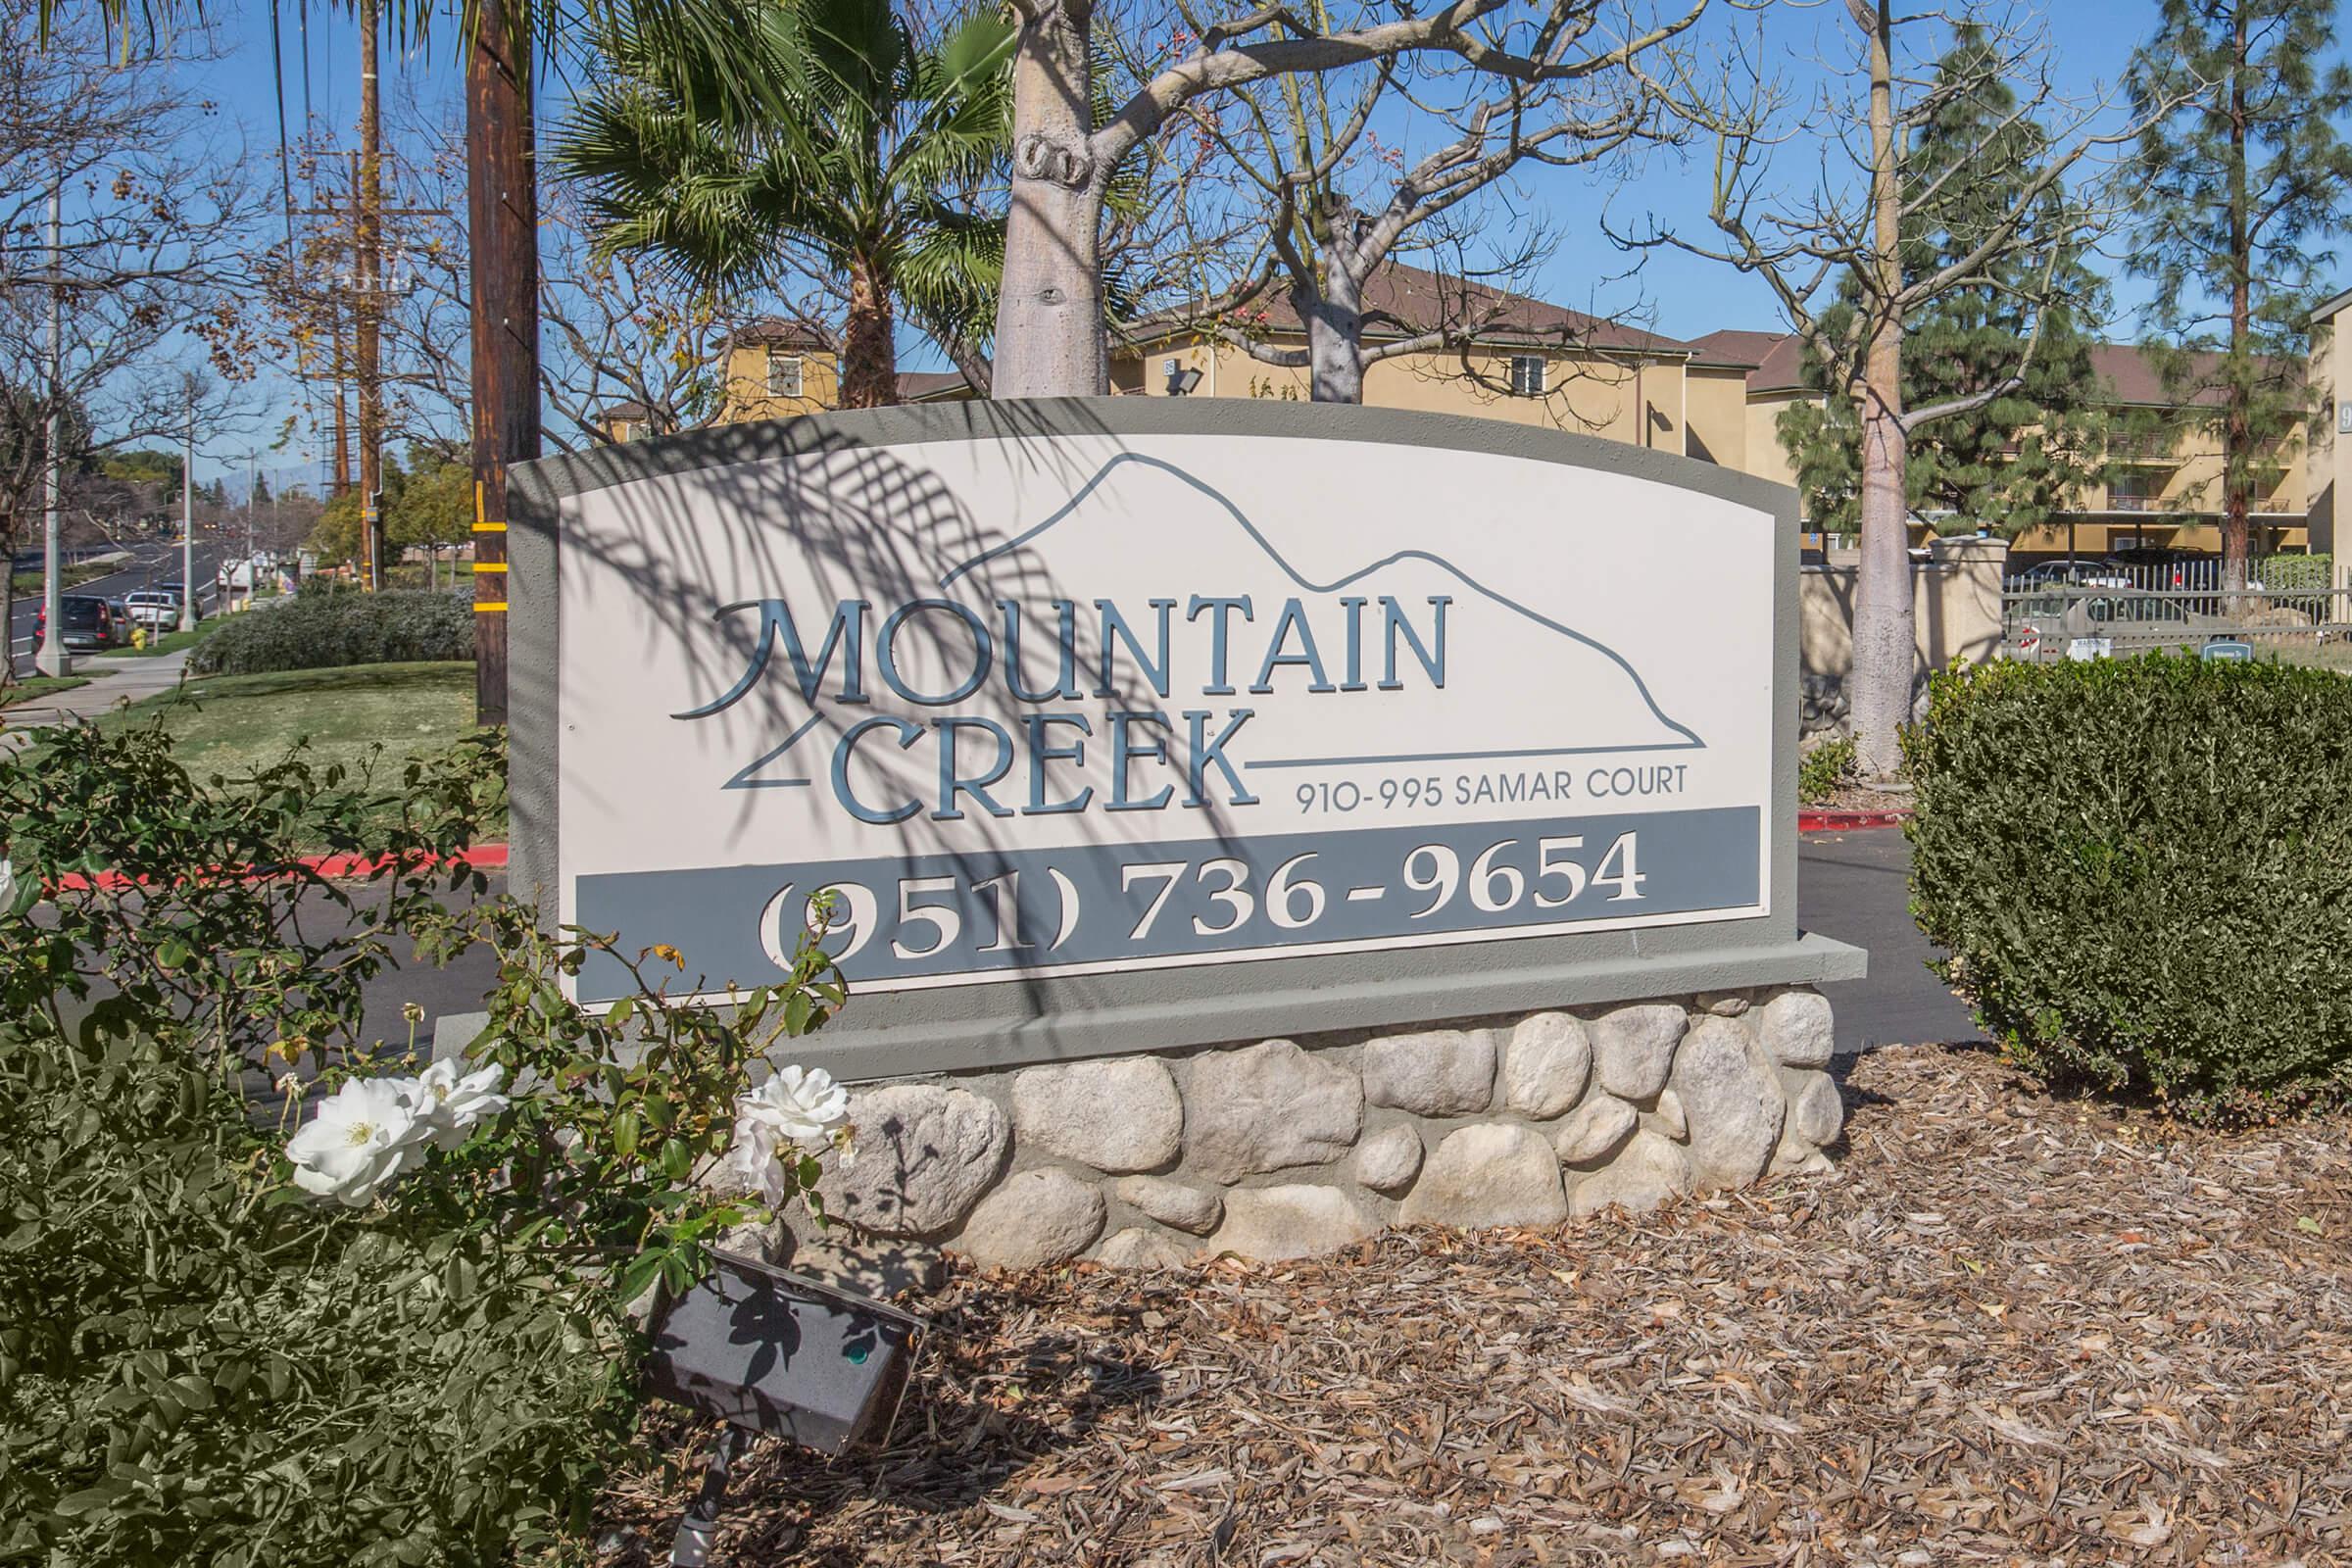 Mountain Creek Apartments monument sign